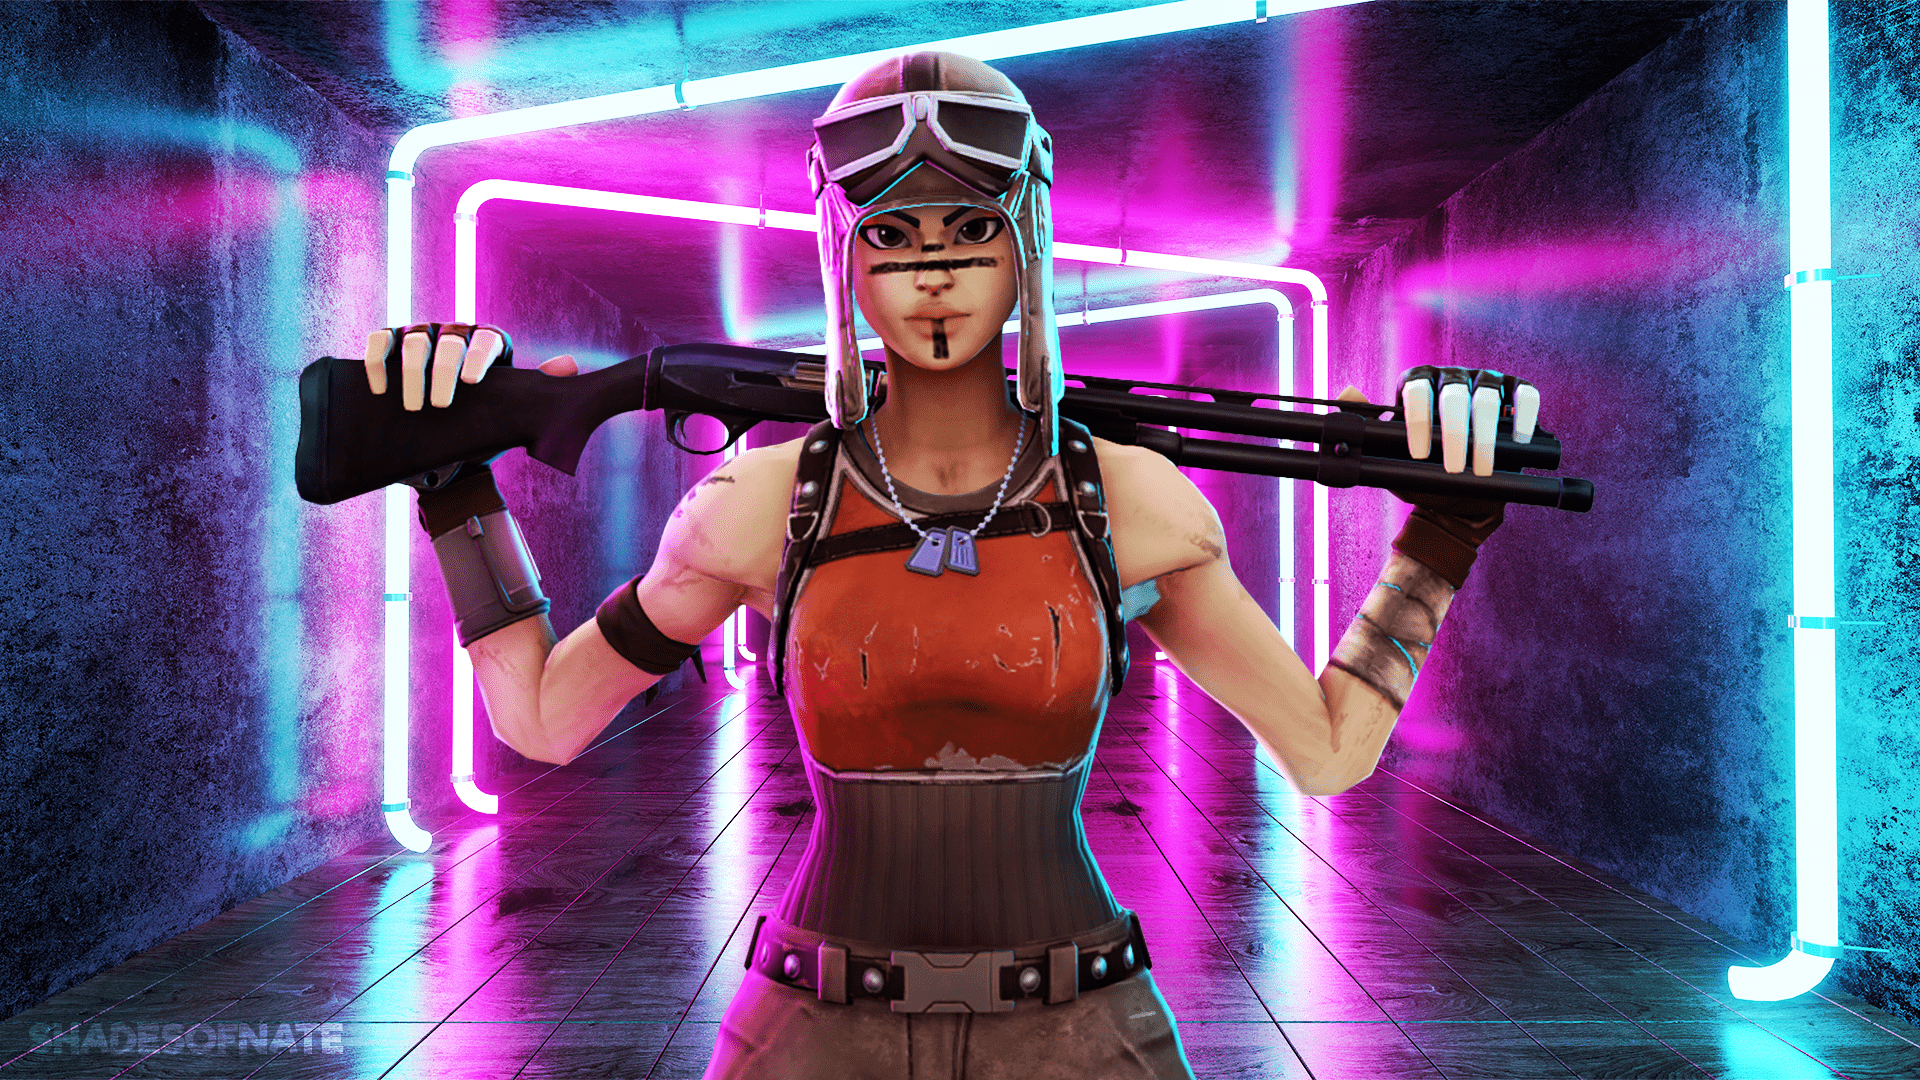 Featured image of post Best Fortnite Wallpapers Renegade Raider / Cool collections v bucks free season oamwes workshop guided missile fortnite location this item has top ten best fortnite skins of all renegade disco fortnite dance raider wallpaper 1440p fortnite panda team leader costume.